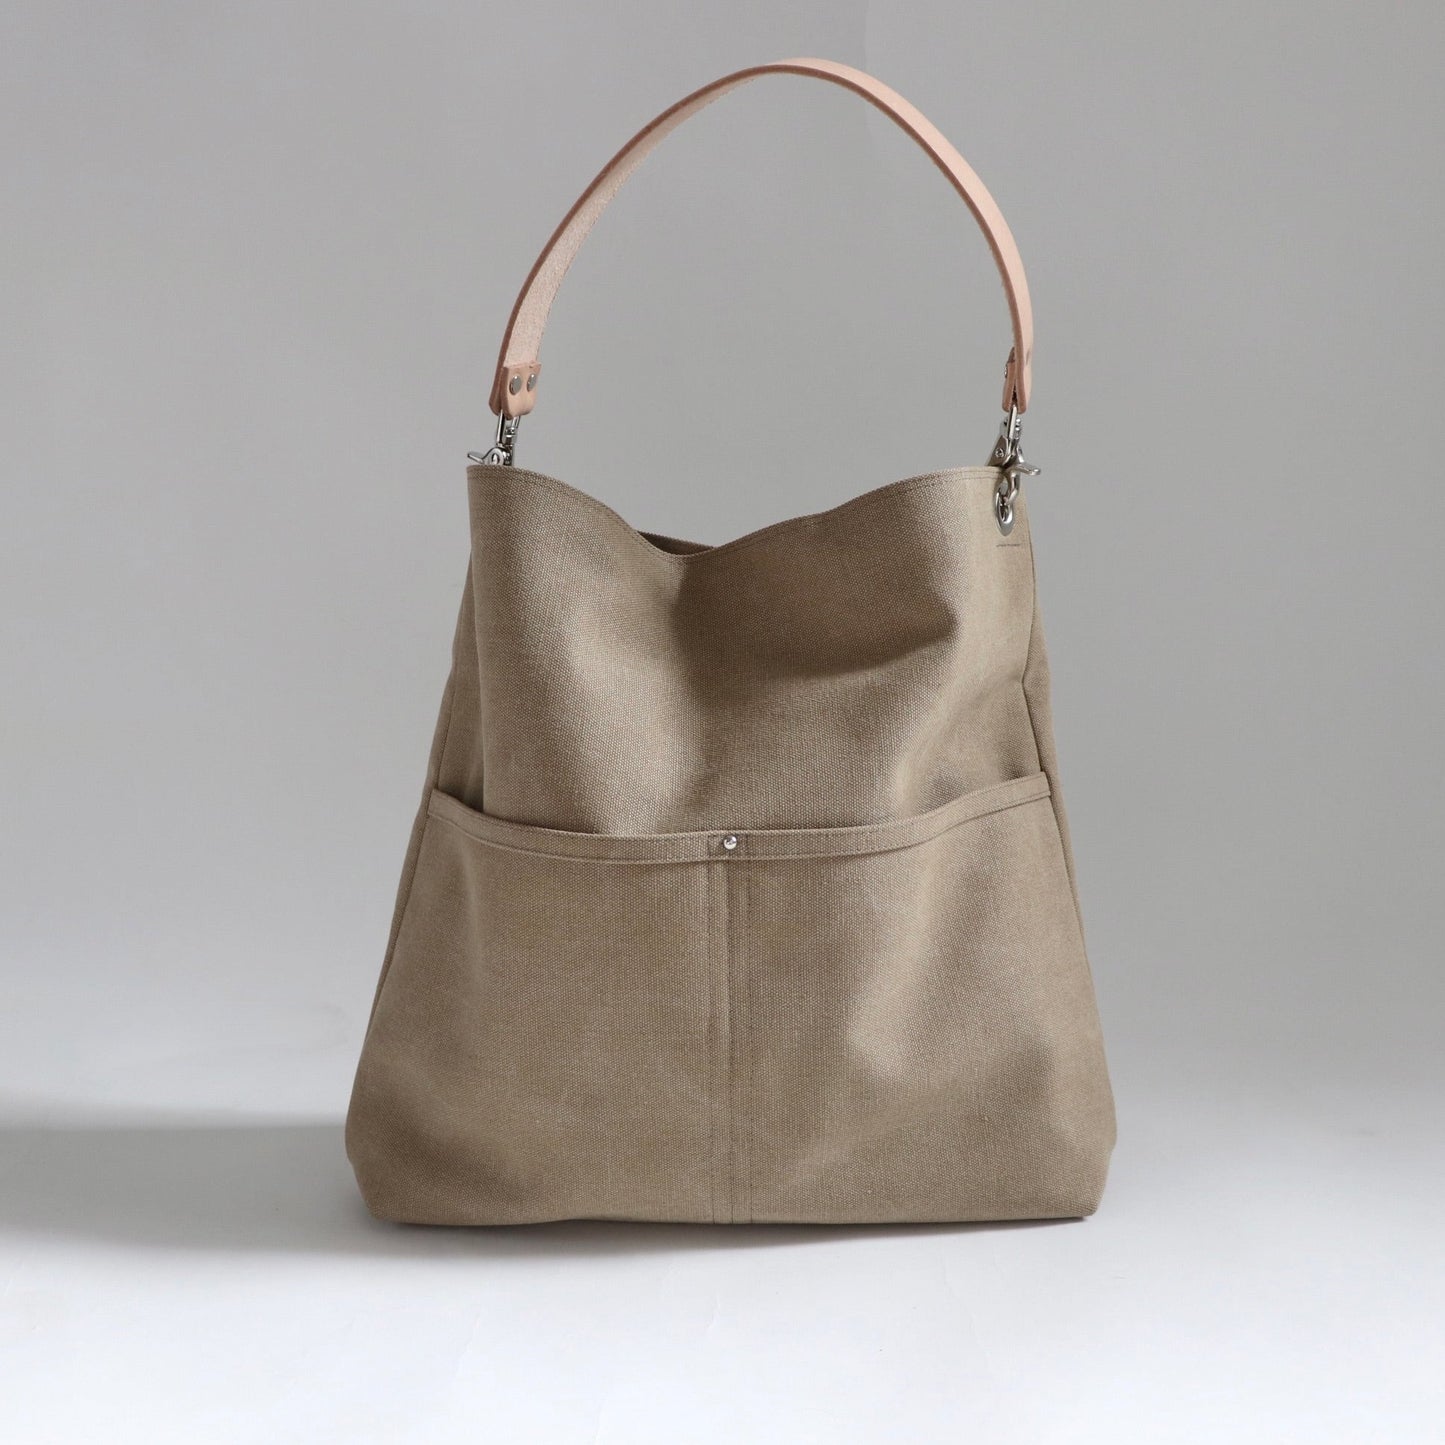 Hobo tote bag with front pockets in khaki color canvas